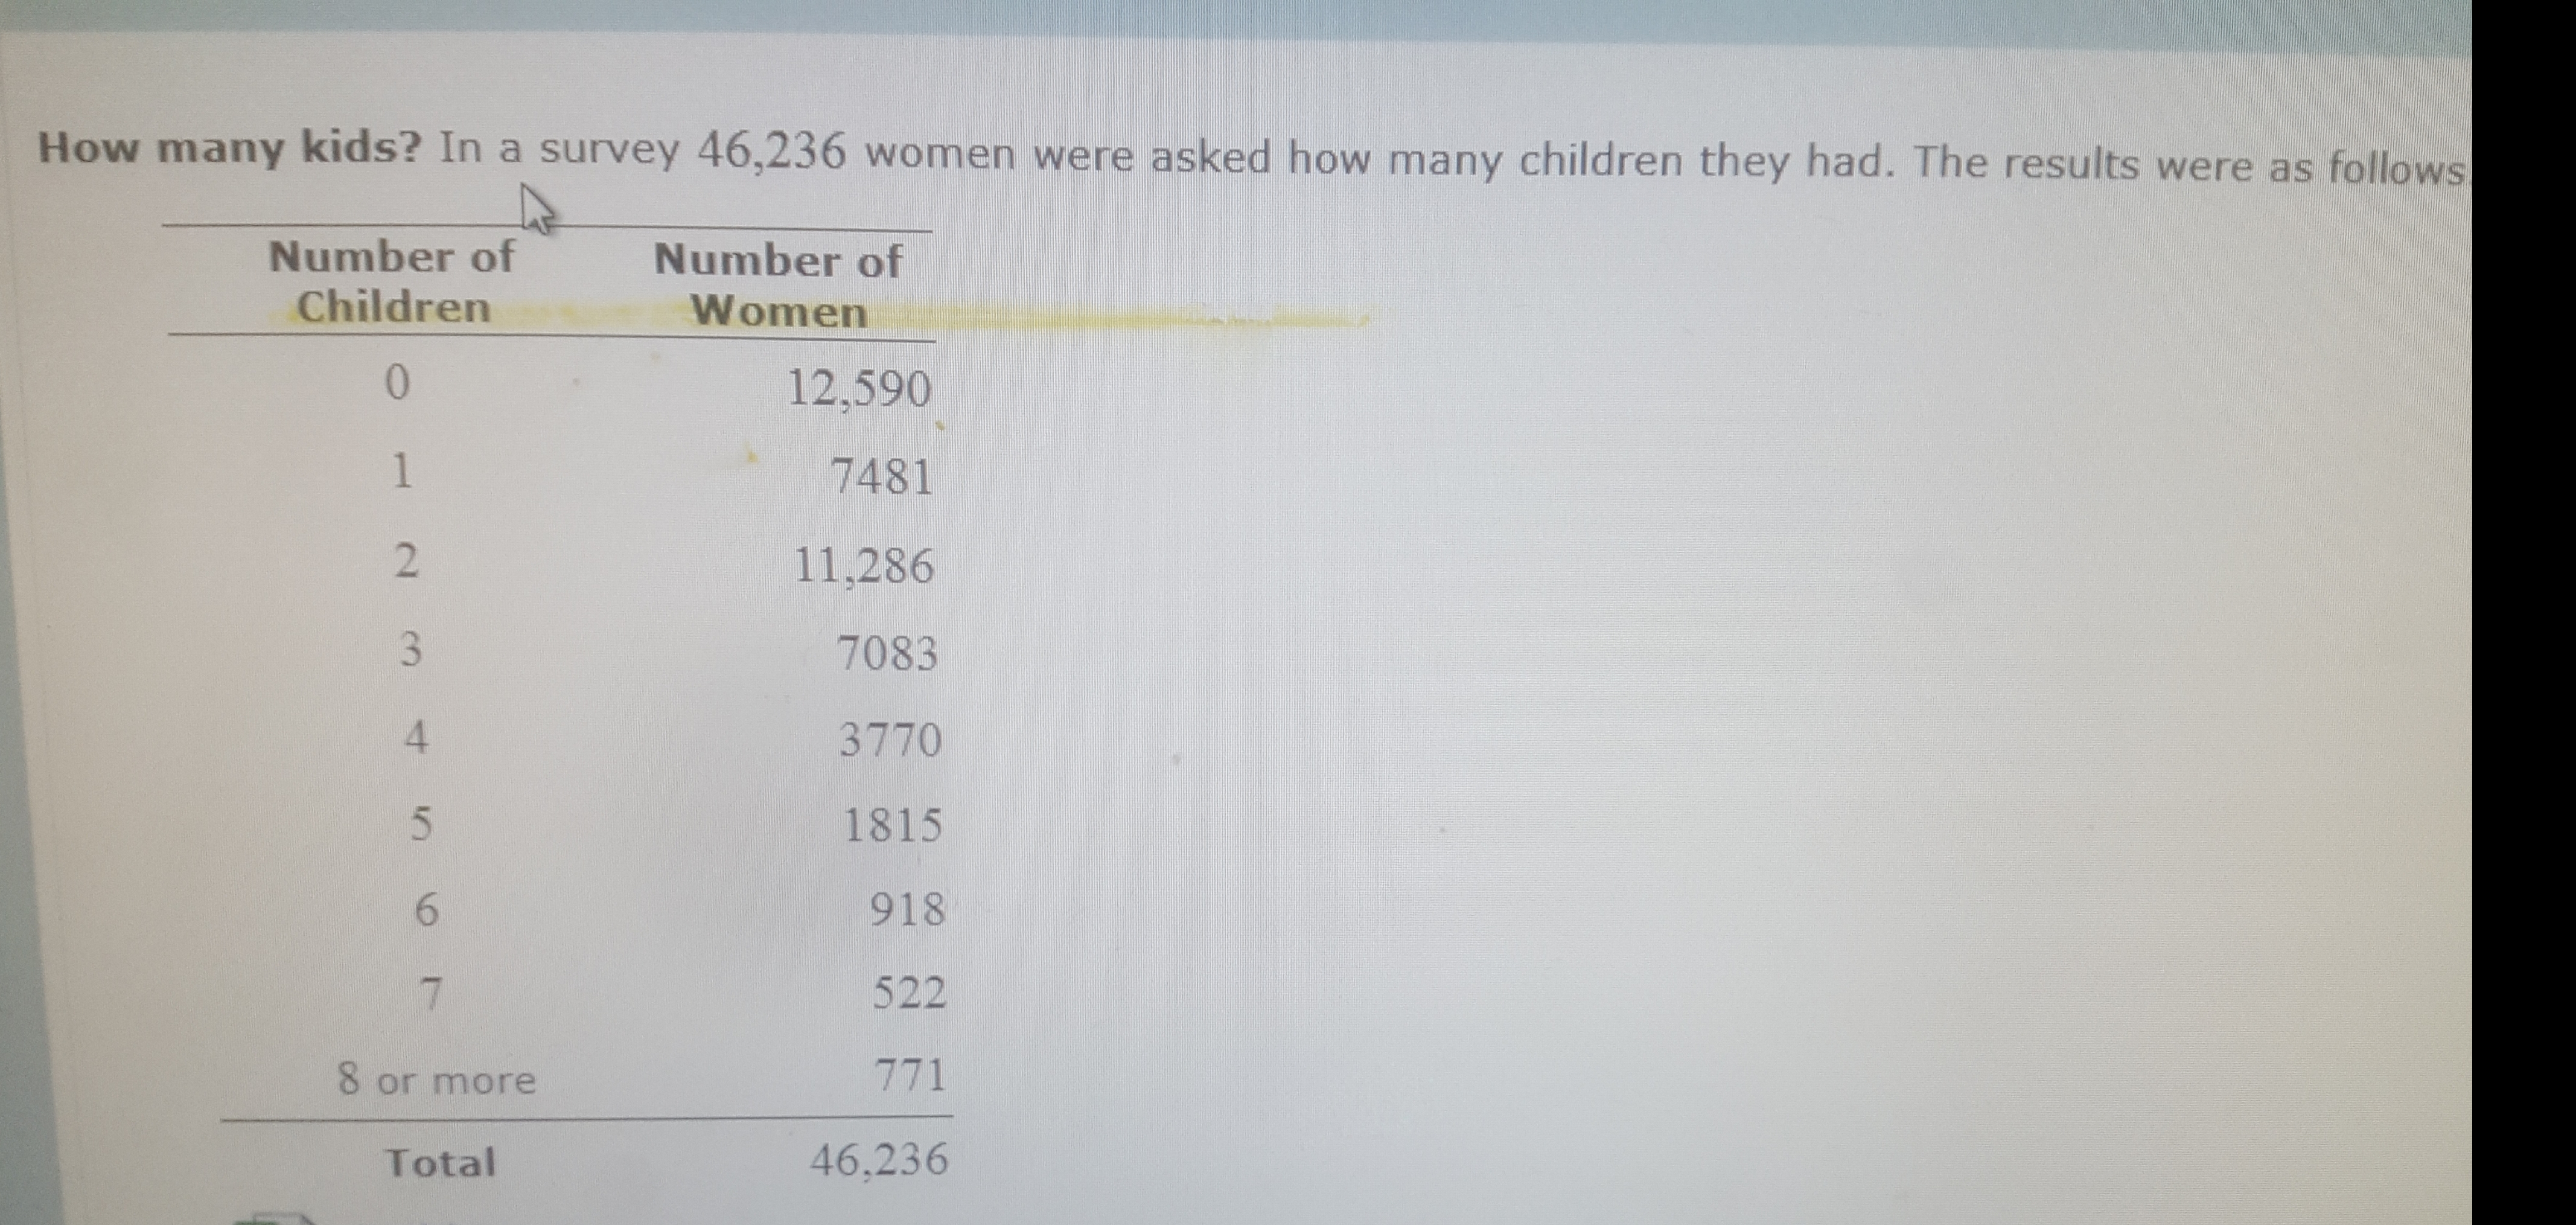 How many kids? In a survey 46,236 women were asked how many children they had. The results were as follows
Number of
Children
Number of
Women
0
12,590
1
7481
11,286
7083
4
3770
1815
5
6
918
522
7
771
8 or more
46,236
Total
C2
